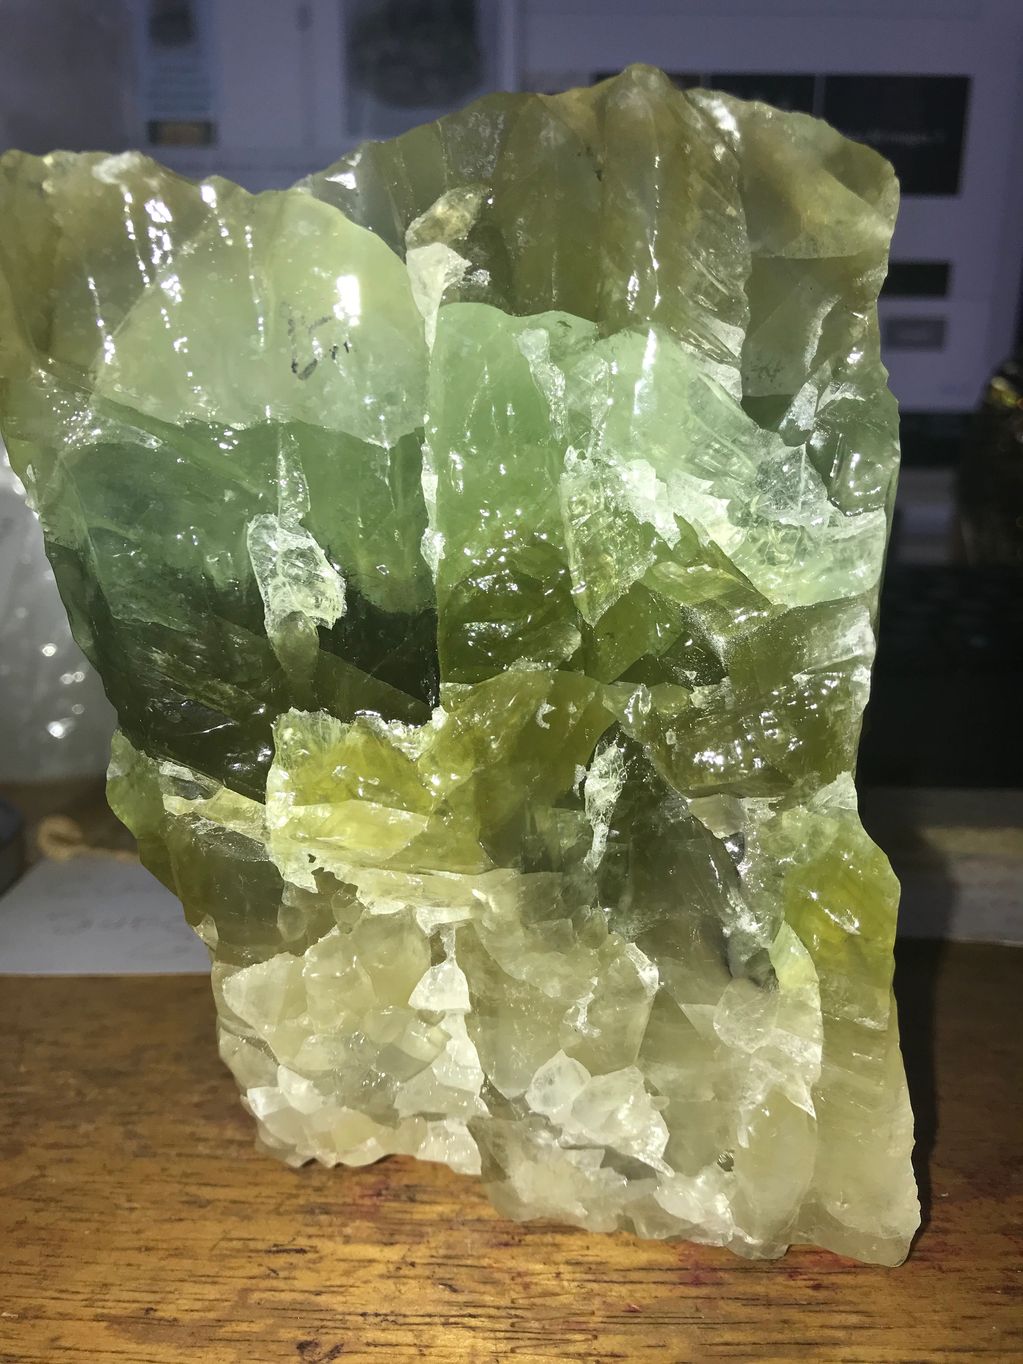 Green calcite can assist in dissolving old rigid belief systems, restoring balance to your mind. It 